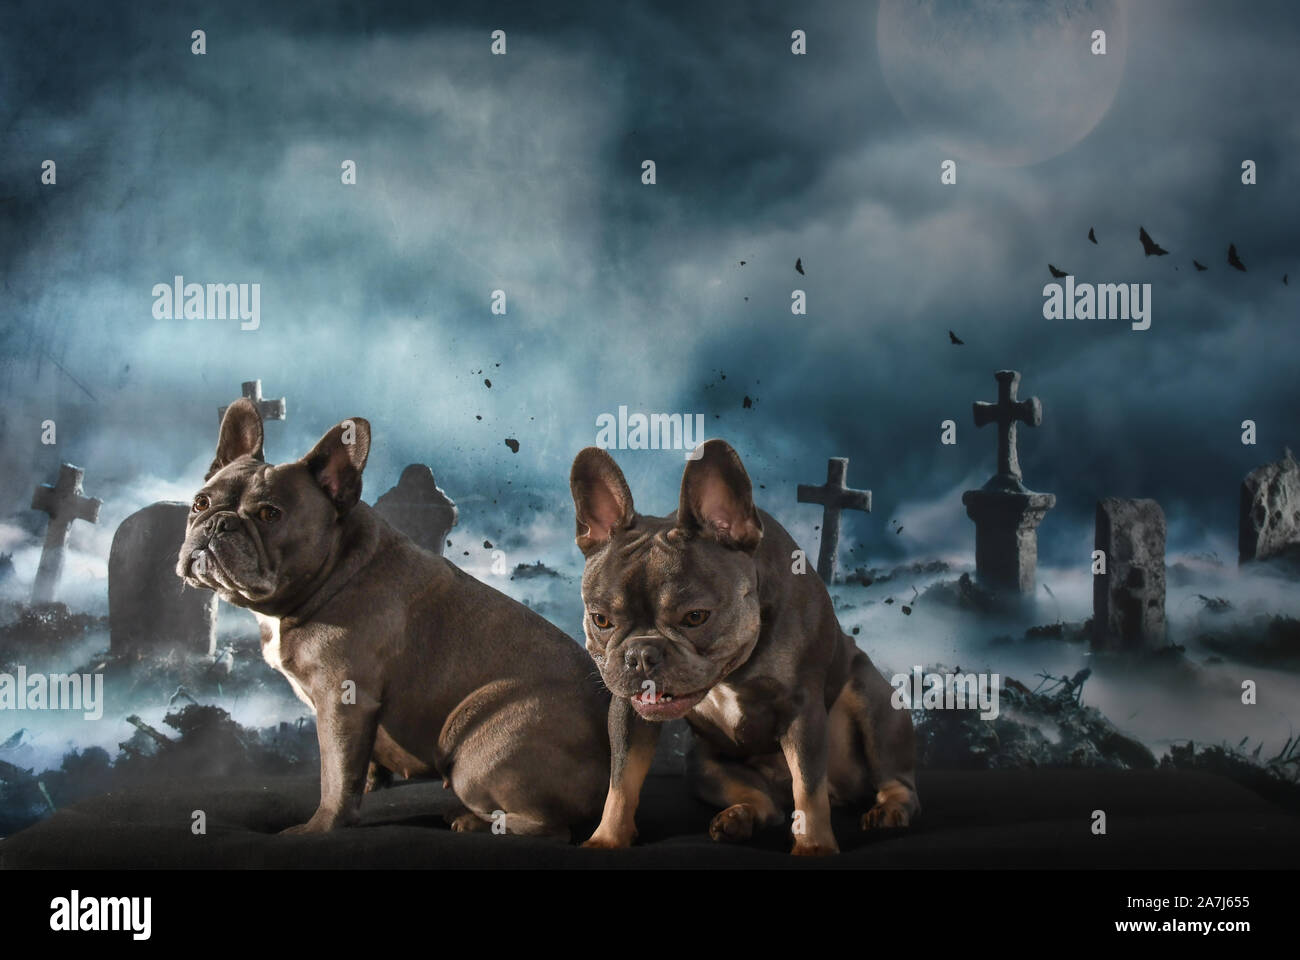 French bulldogs in costume posing for Halloween photo shoot Stock Photo